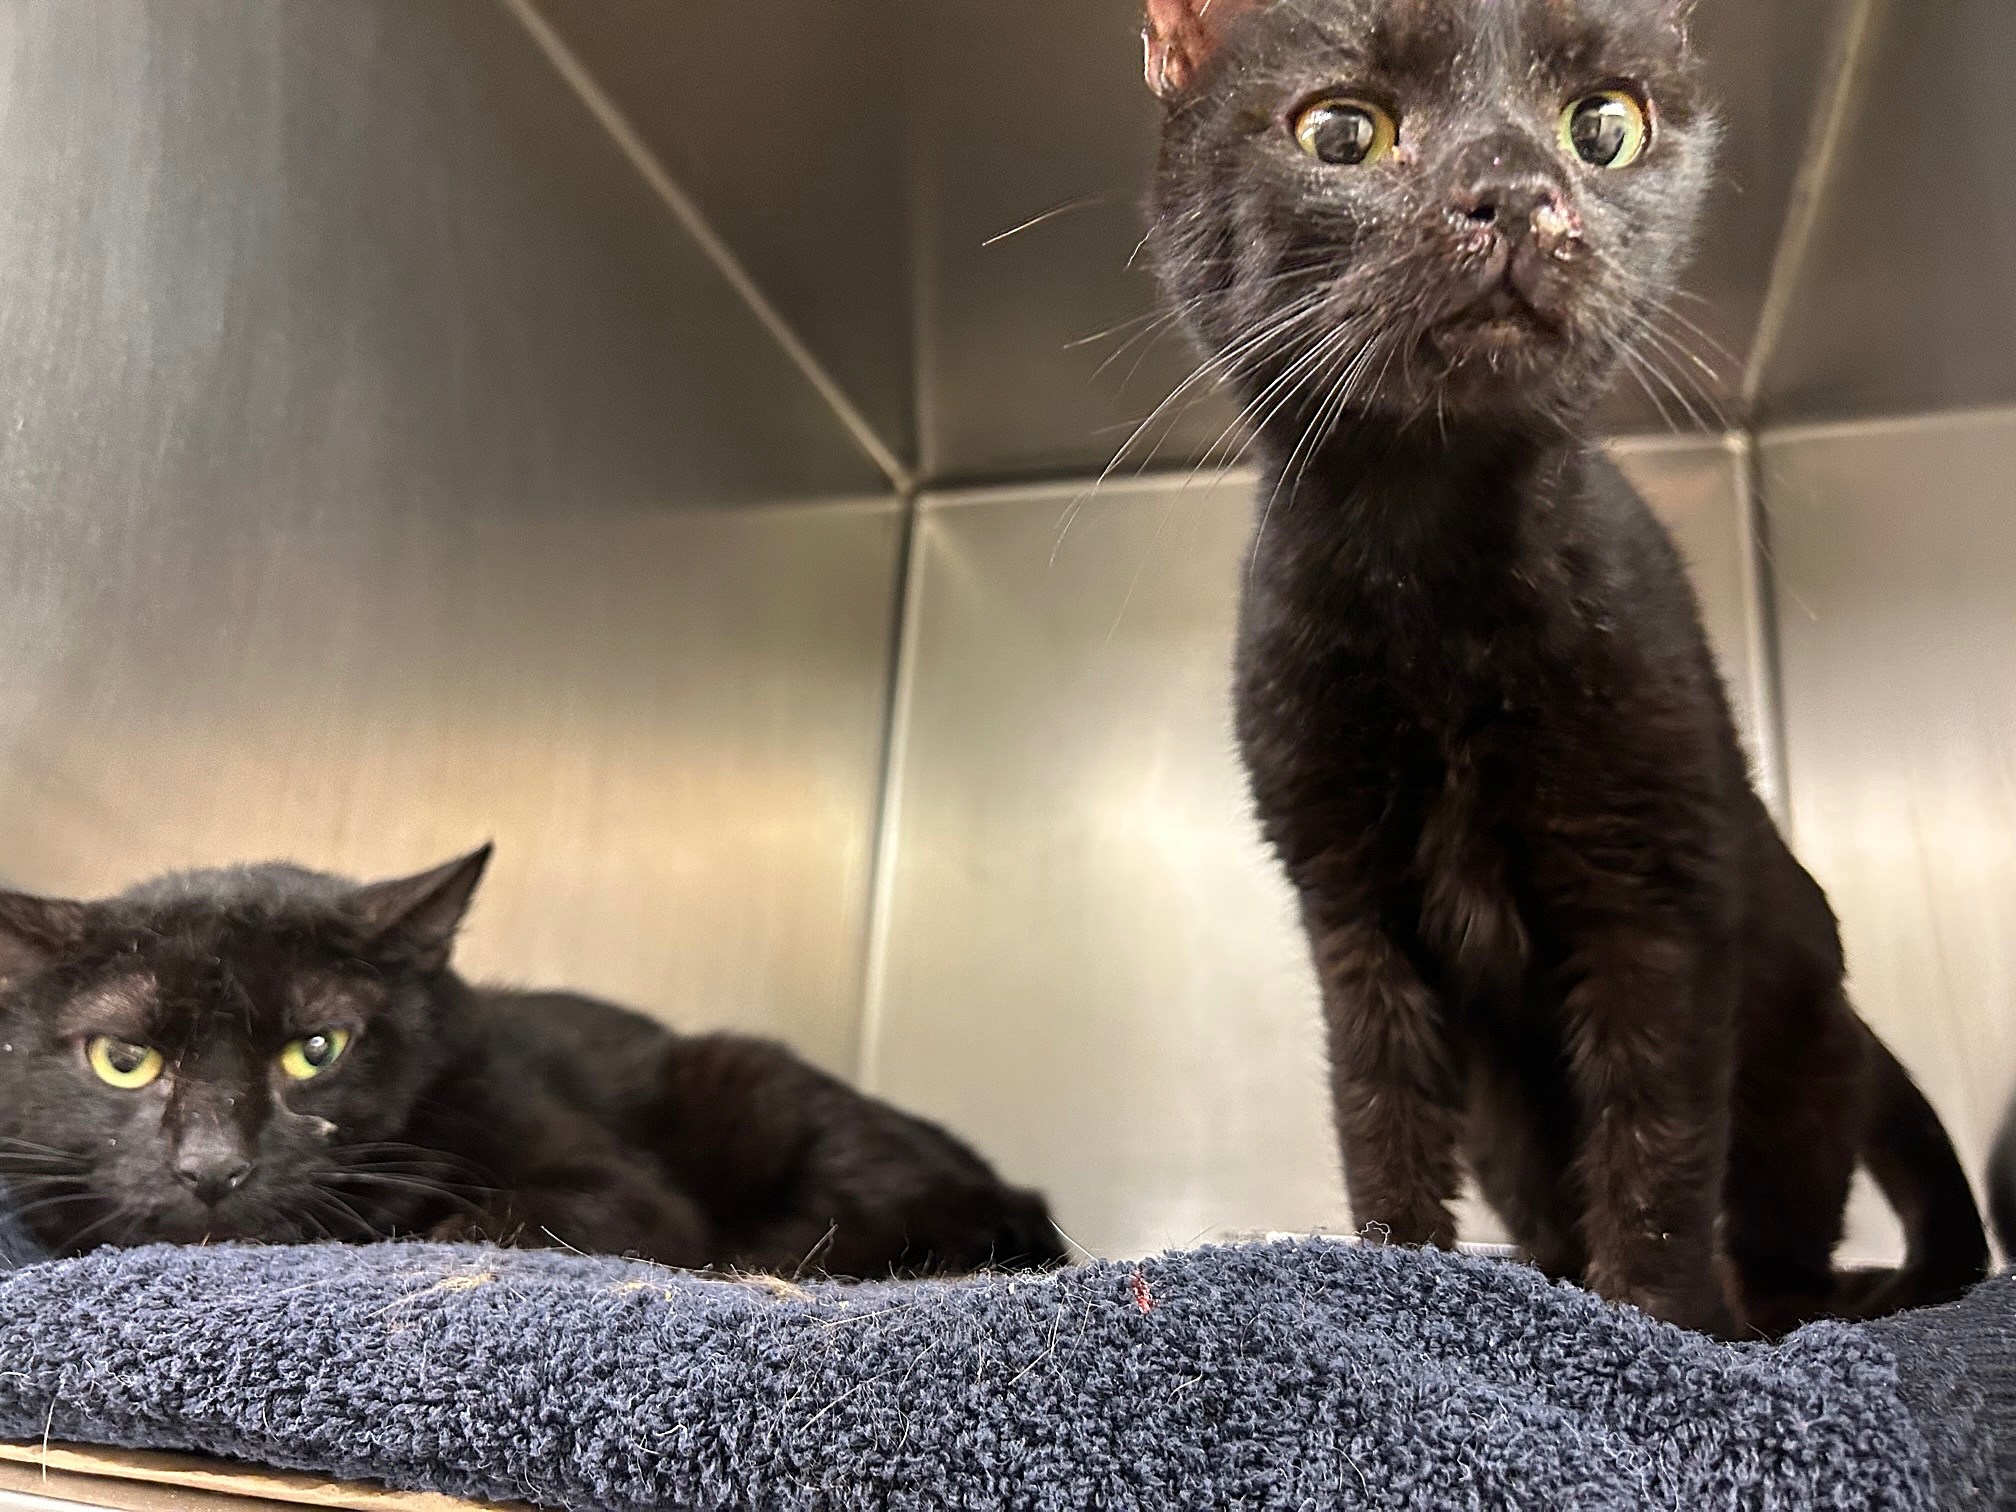 25 cats have to be euthanized after rescue from animal cruelty in Brick, NJ